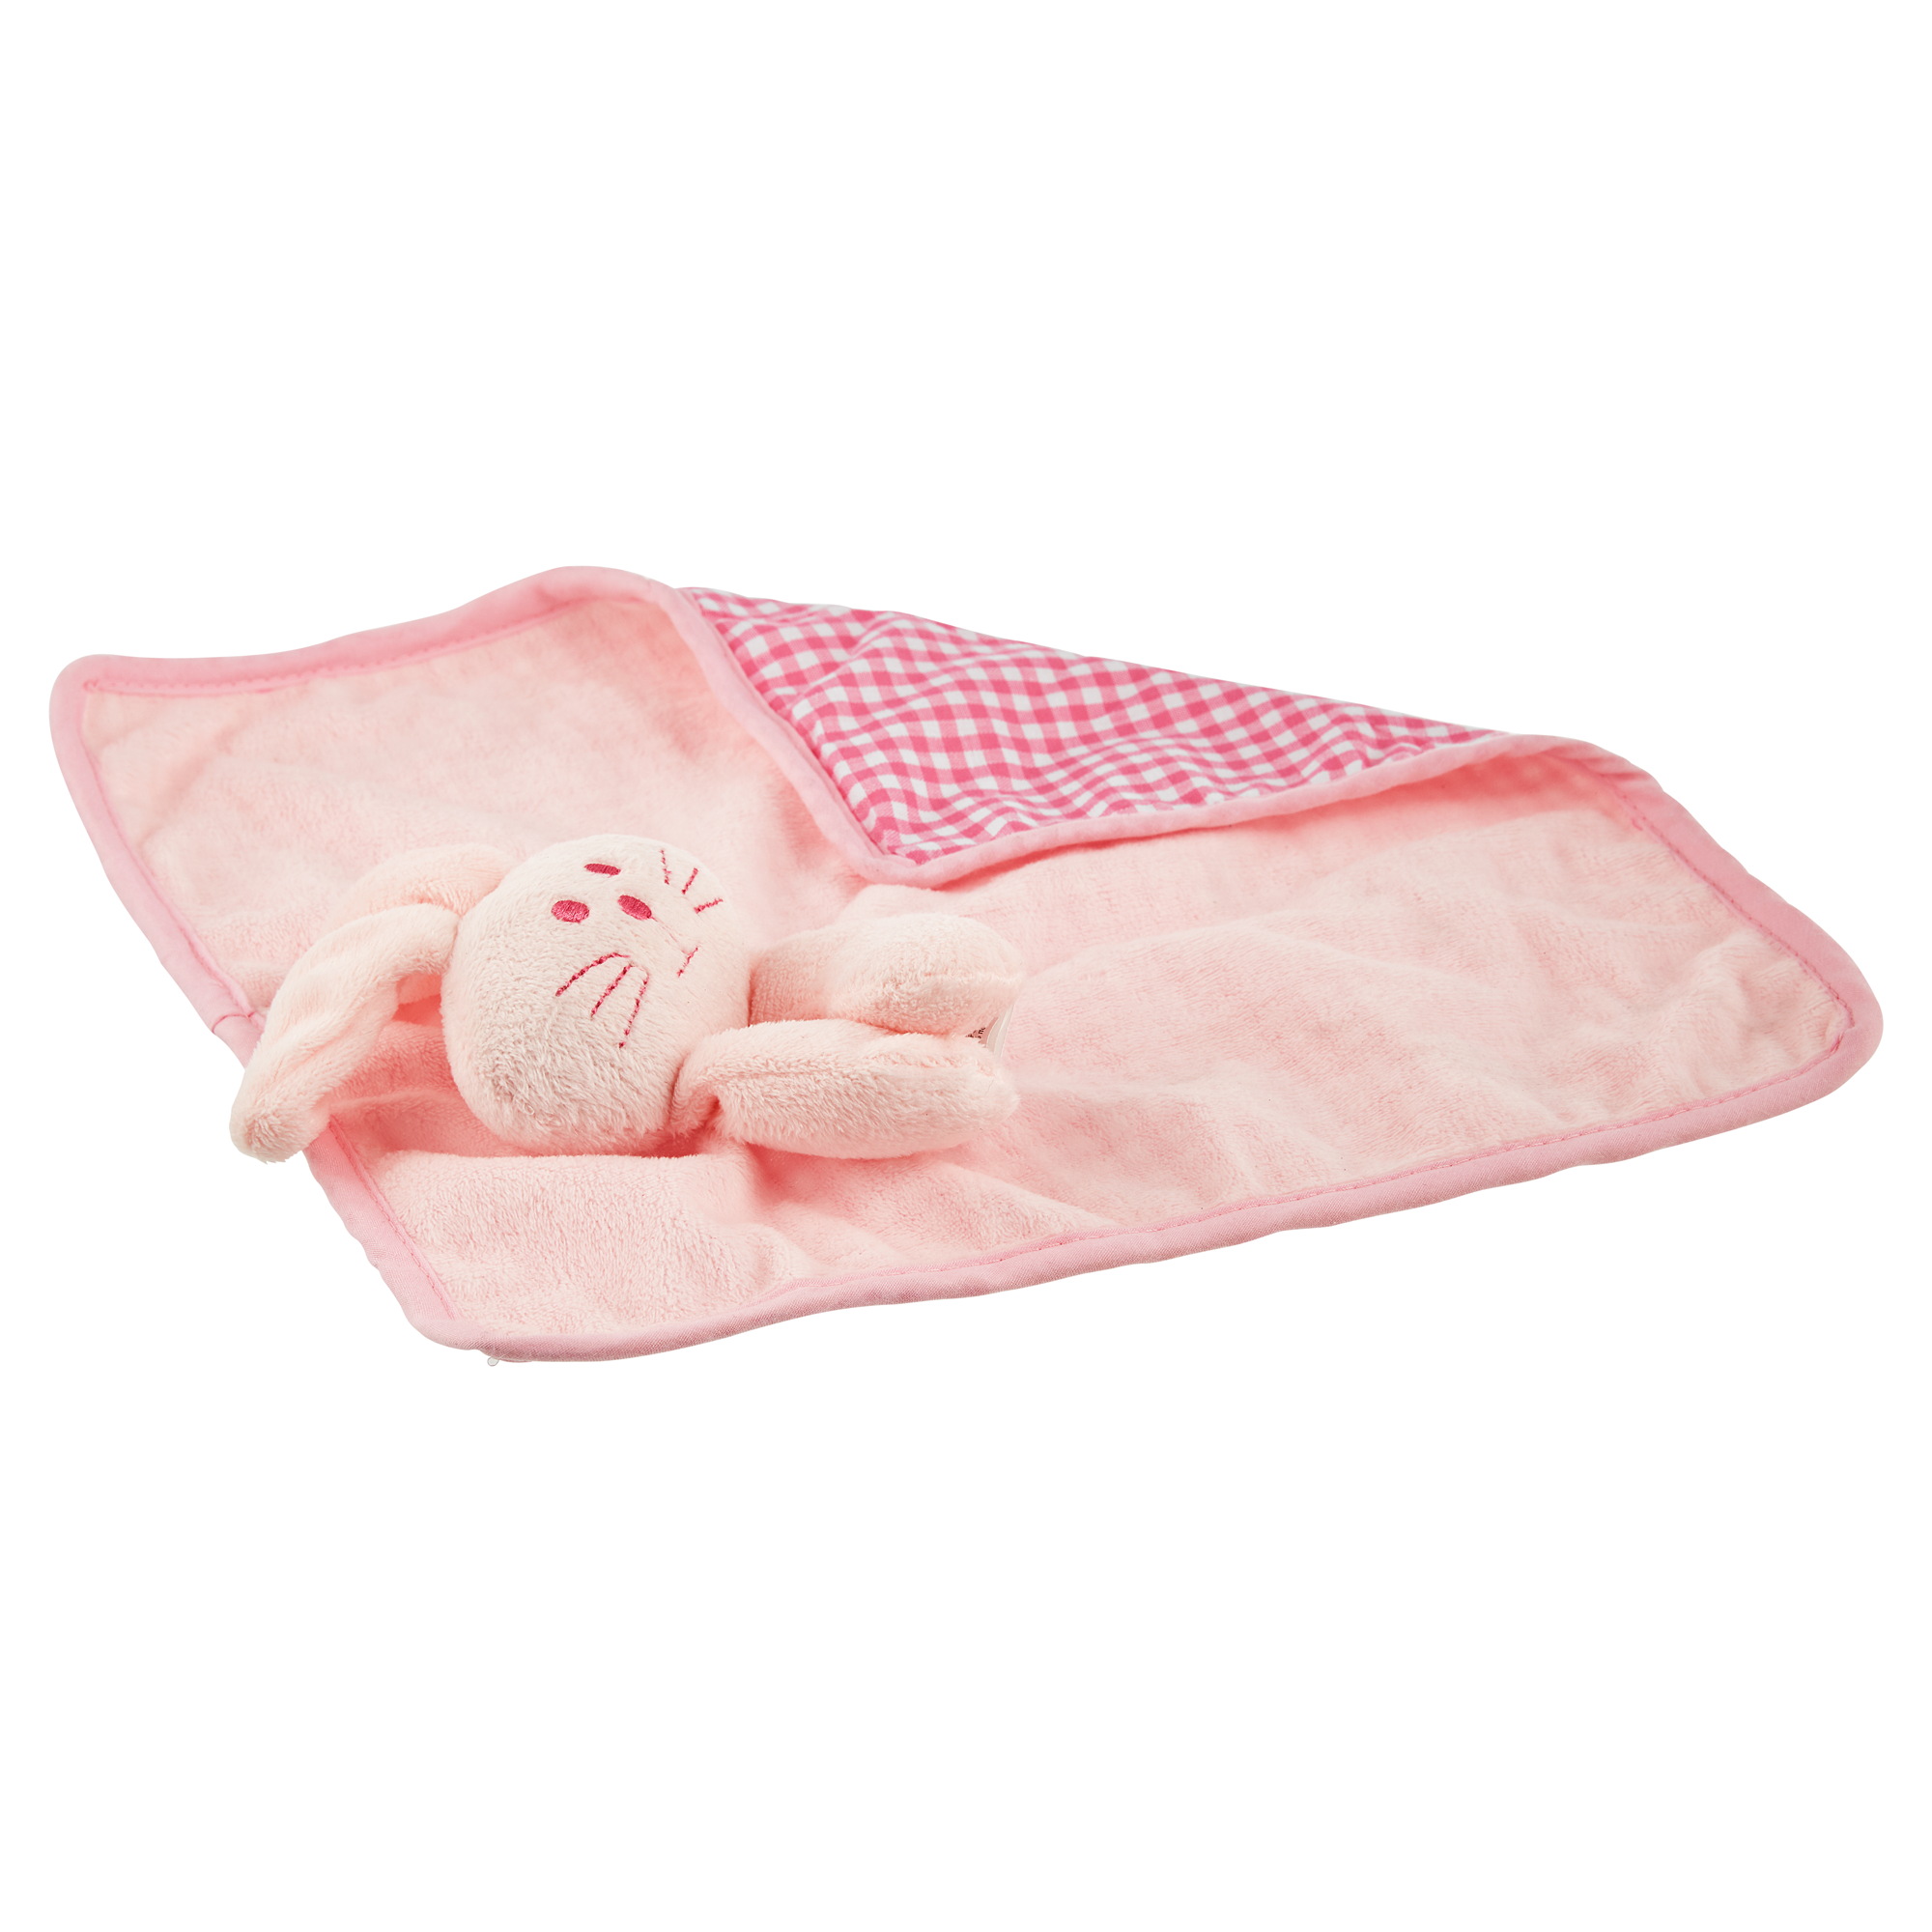 Welpenspielzeug "Puppy Snooze" Kaninchen rosa 30 x 30 cm + product picture